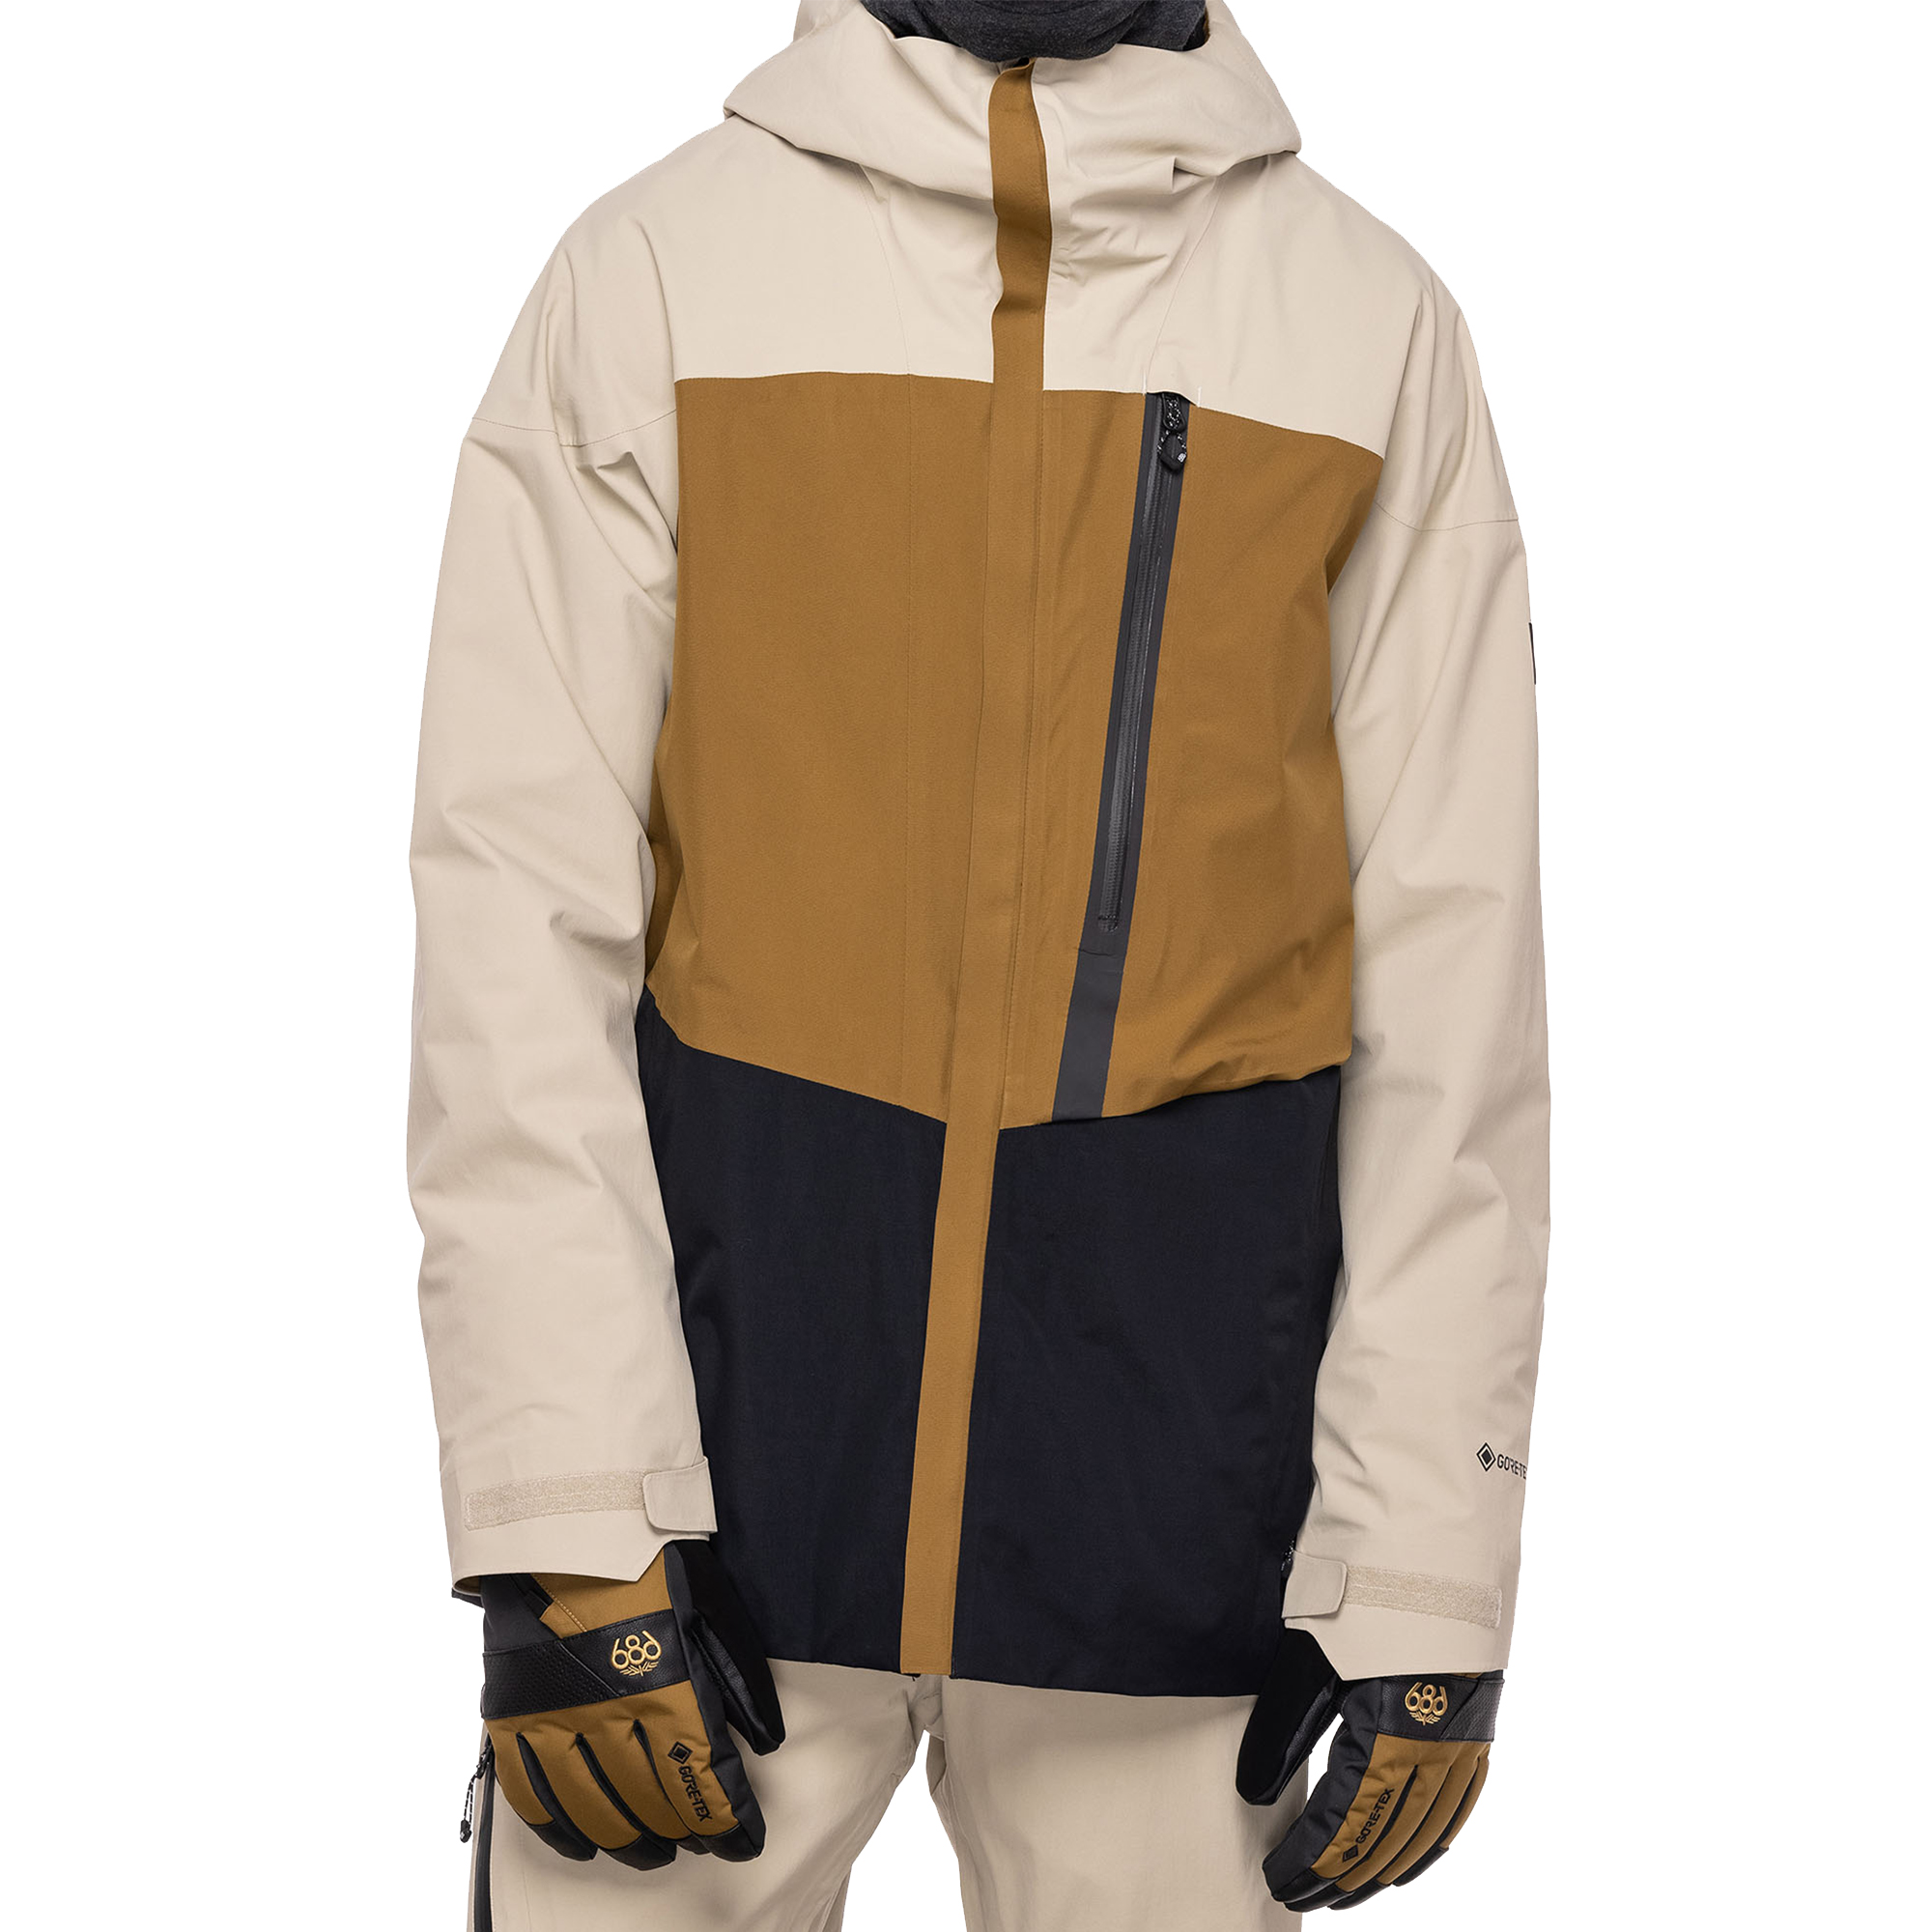 686 Gore-Tex GT Jacket 2023 review686 Gore-Tex GT Jacket - The 